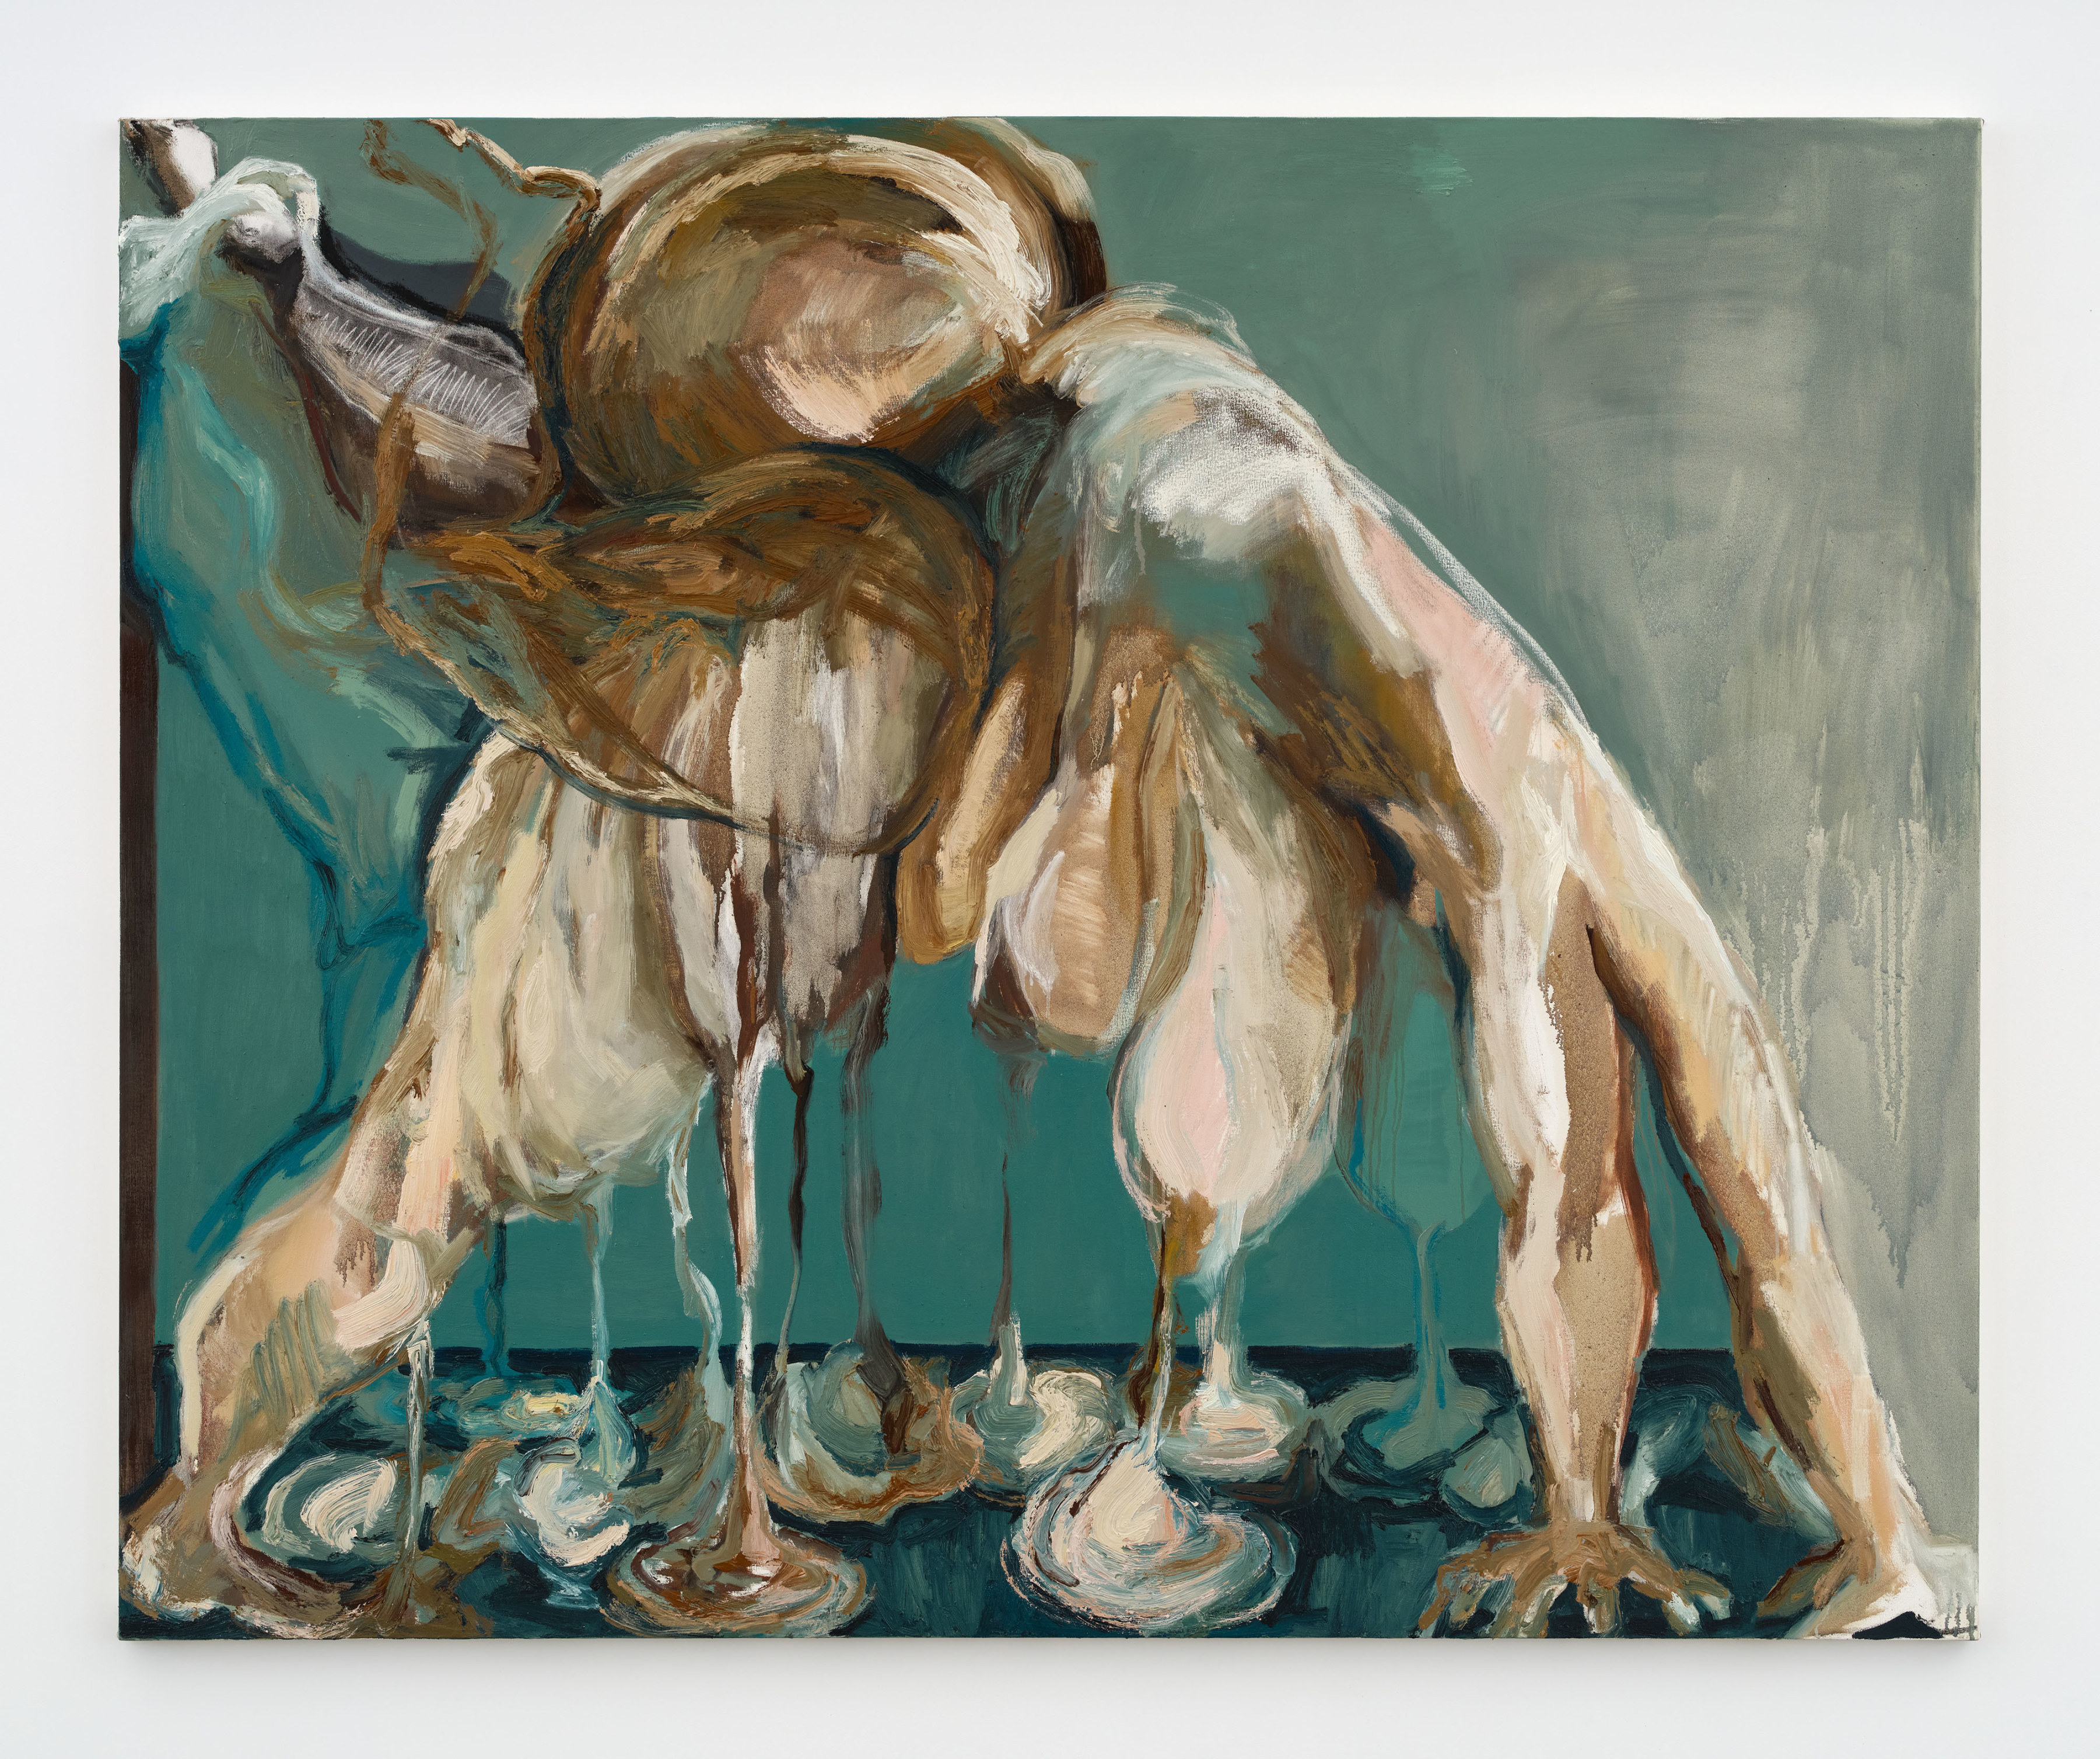 A headless nude figure in side profile in downward dog with one leg in the air, as the flesh drips down and pools at the bottom of the canvas.